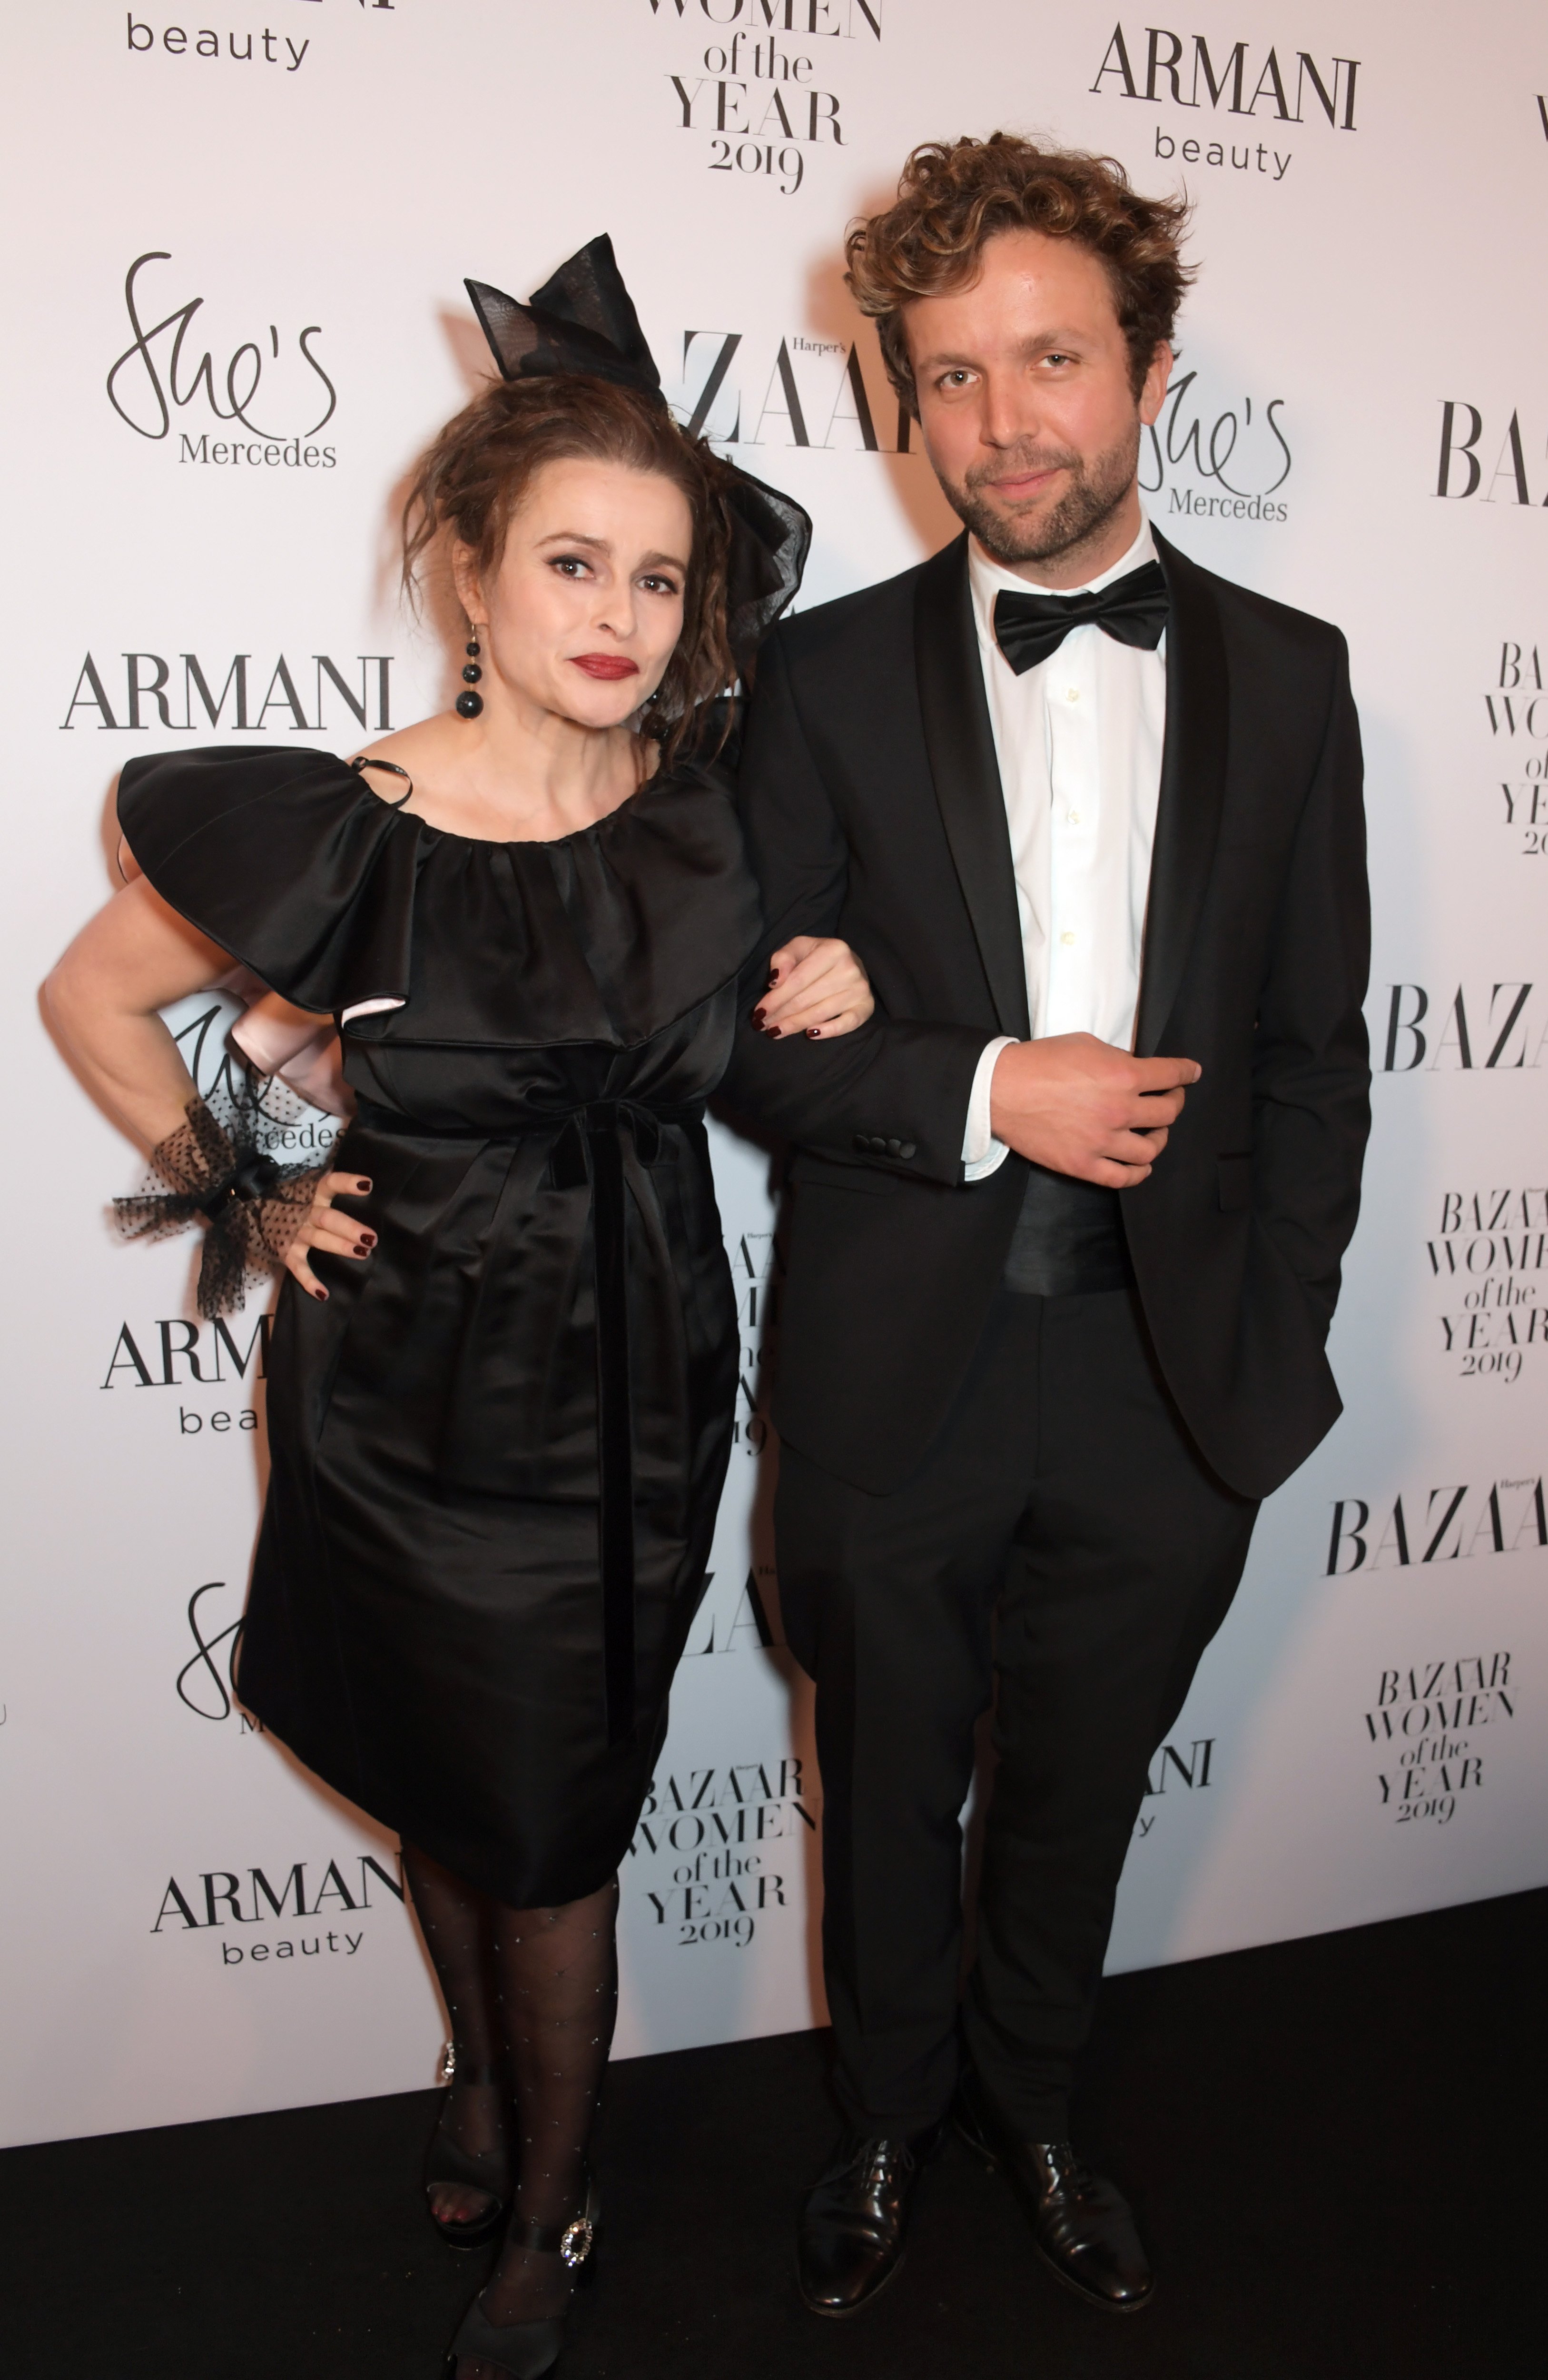 Helena Bonham Carter and Rye Dag Holmboe attend the Harper's Bazaar Women of the Year Awards 2019 at Claridge's Hotel on October 29, 2019 in London, England. | Source: Getty Images